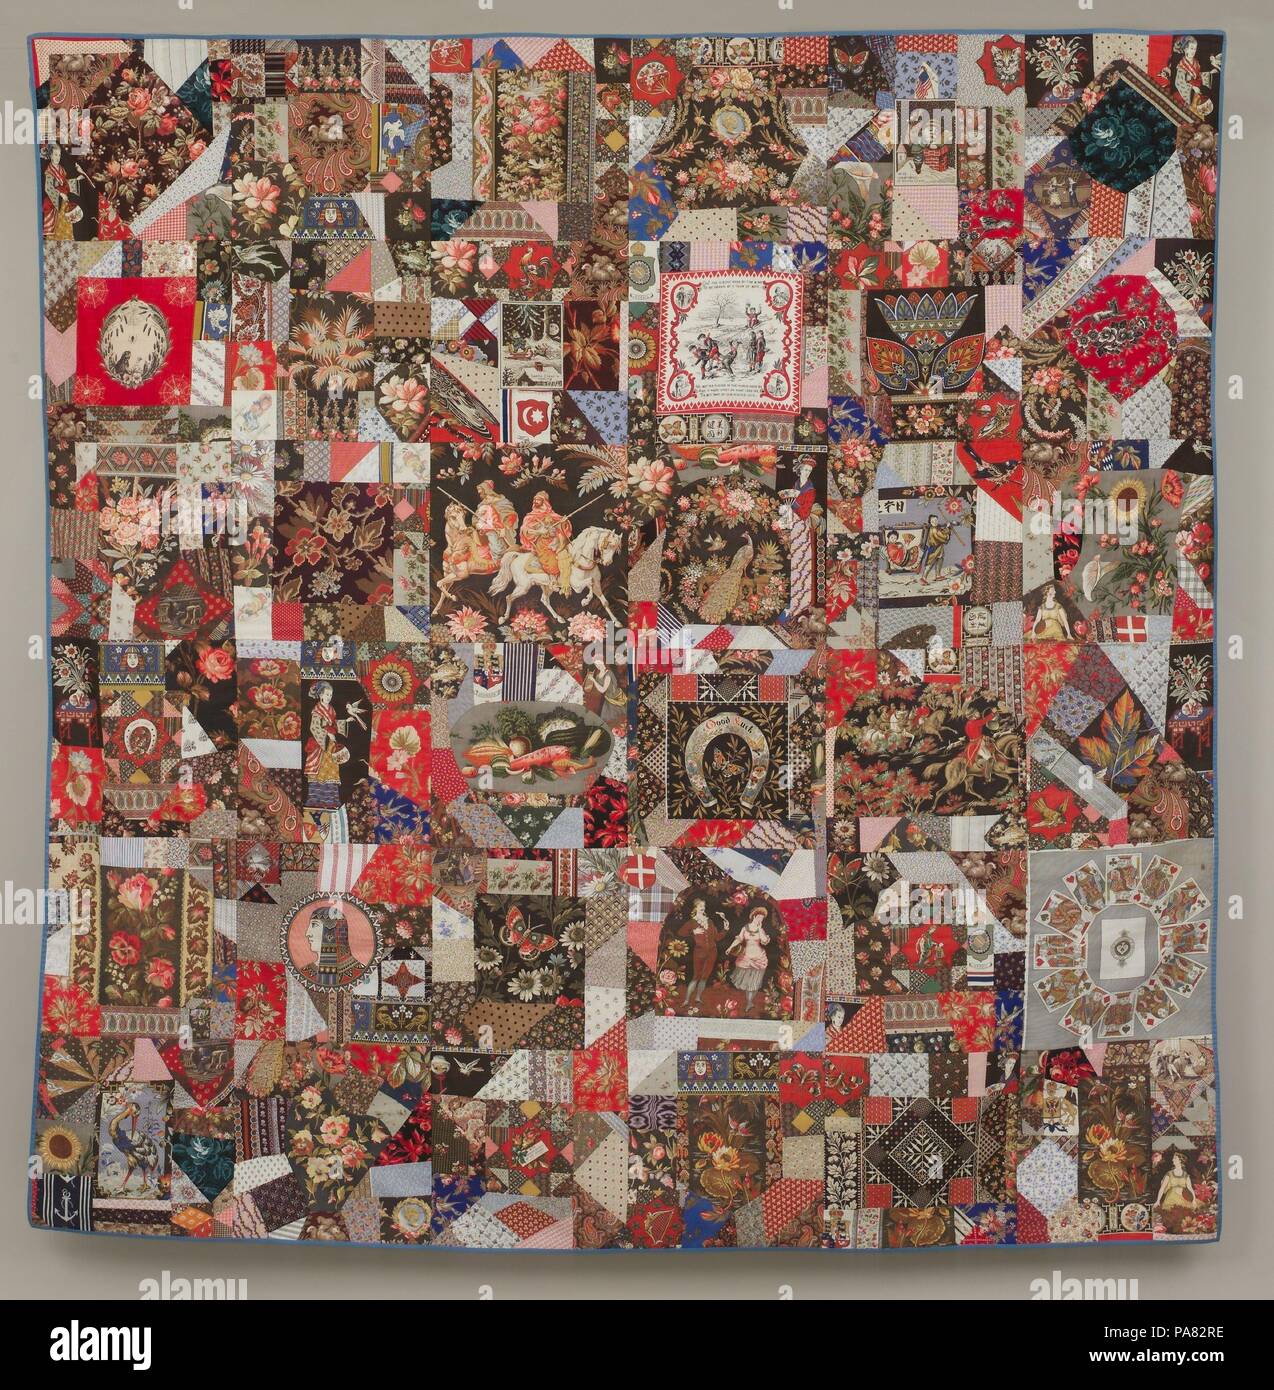 Crazy Quilt. Culture: American. Dimensions: 80 1/4 x 80 in. (203.8 x 203.2  cm). Date: ca. 1880-85. Crazy quilts, a fad in the last decades of the  nineteenth century, were most commonly